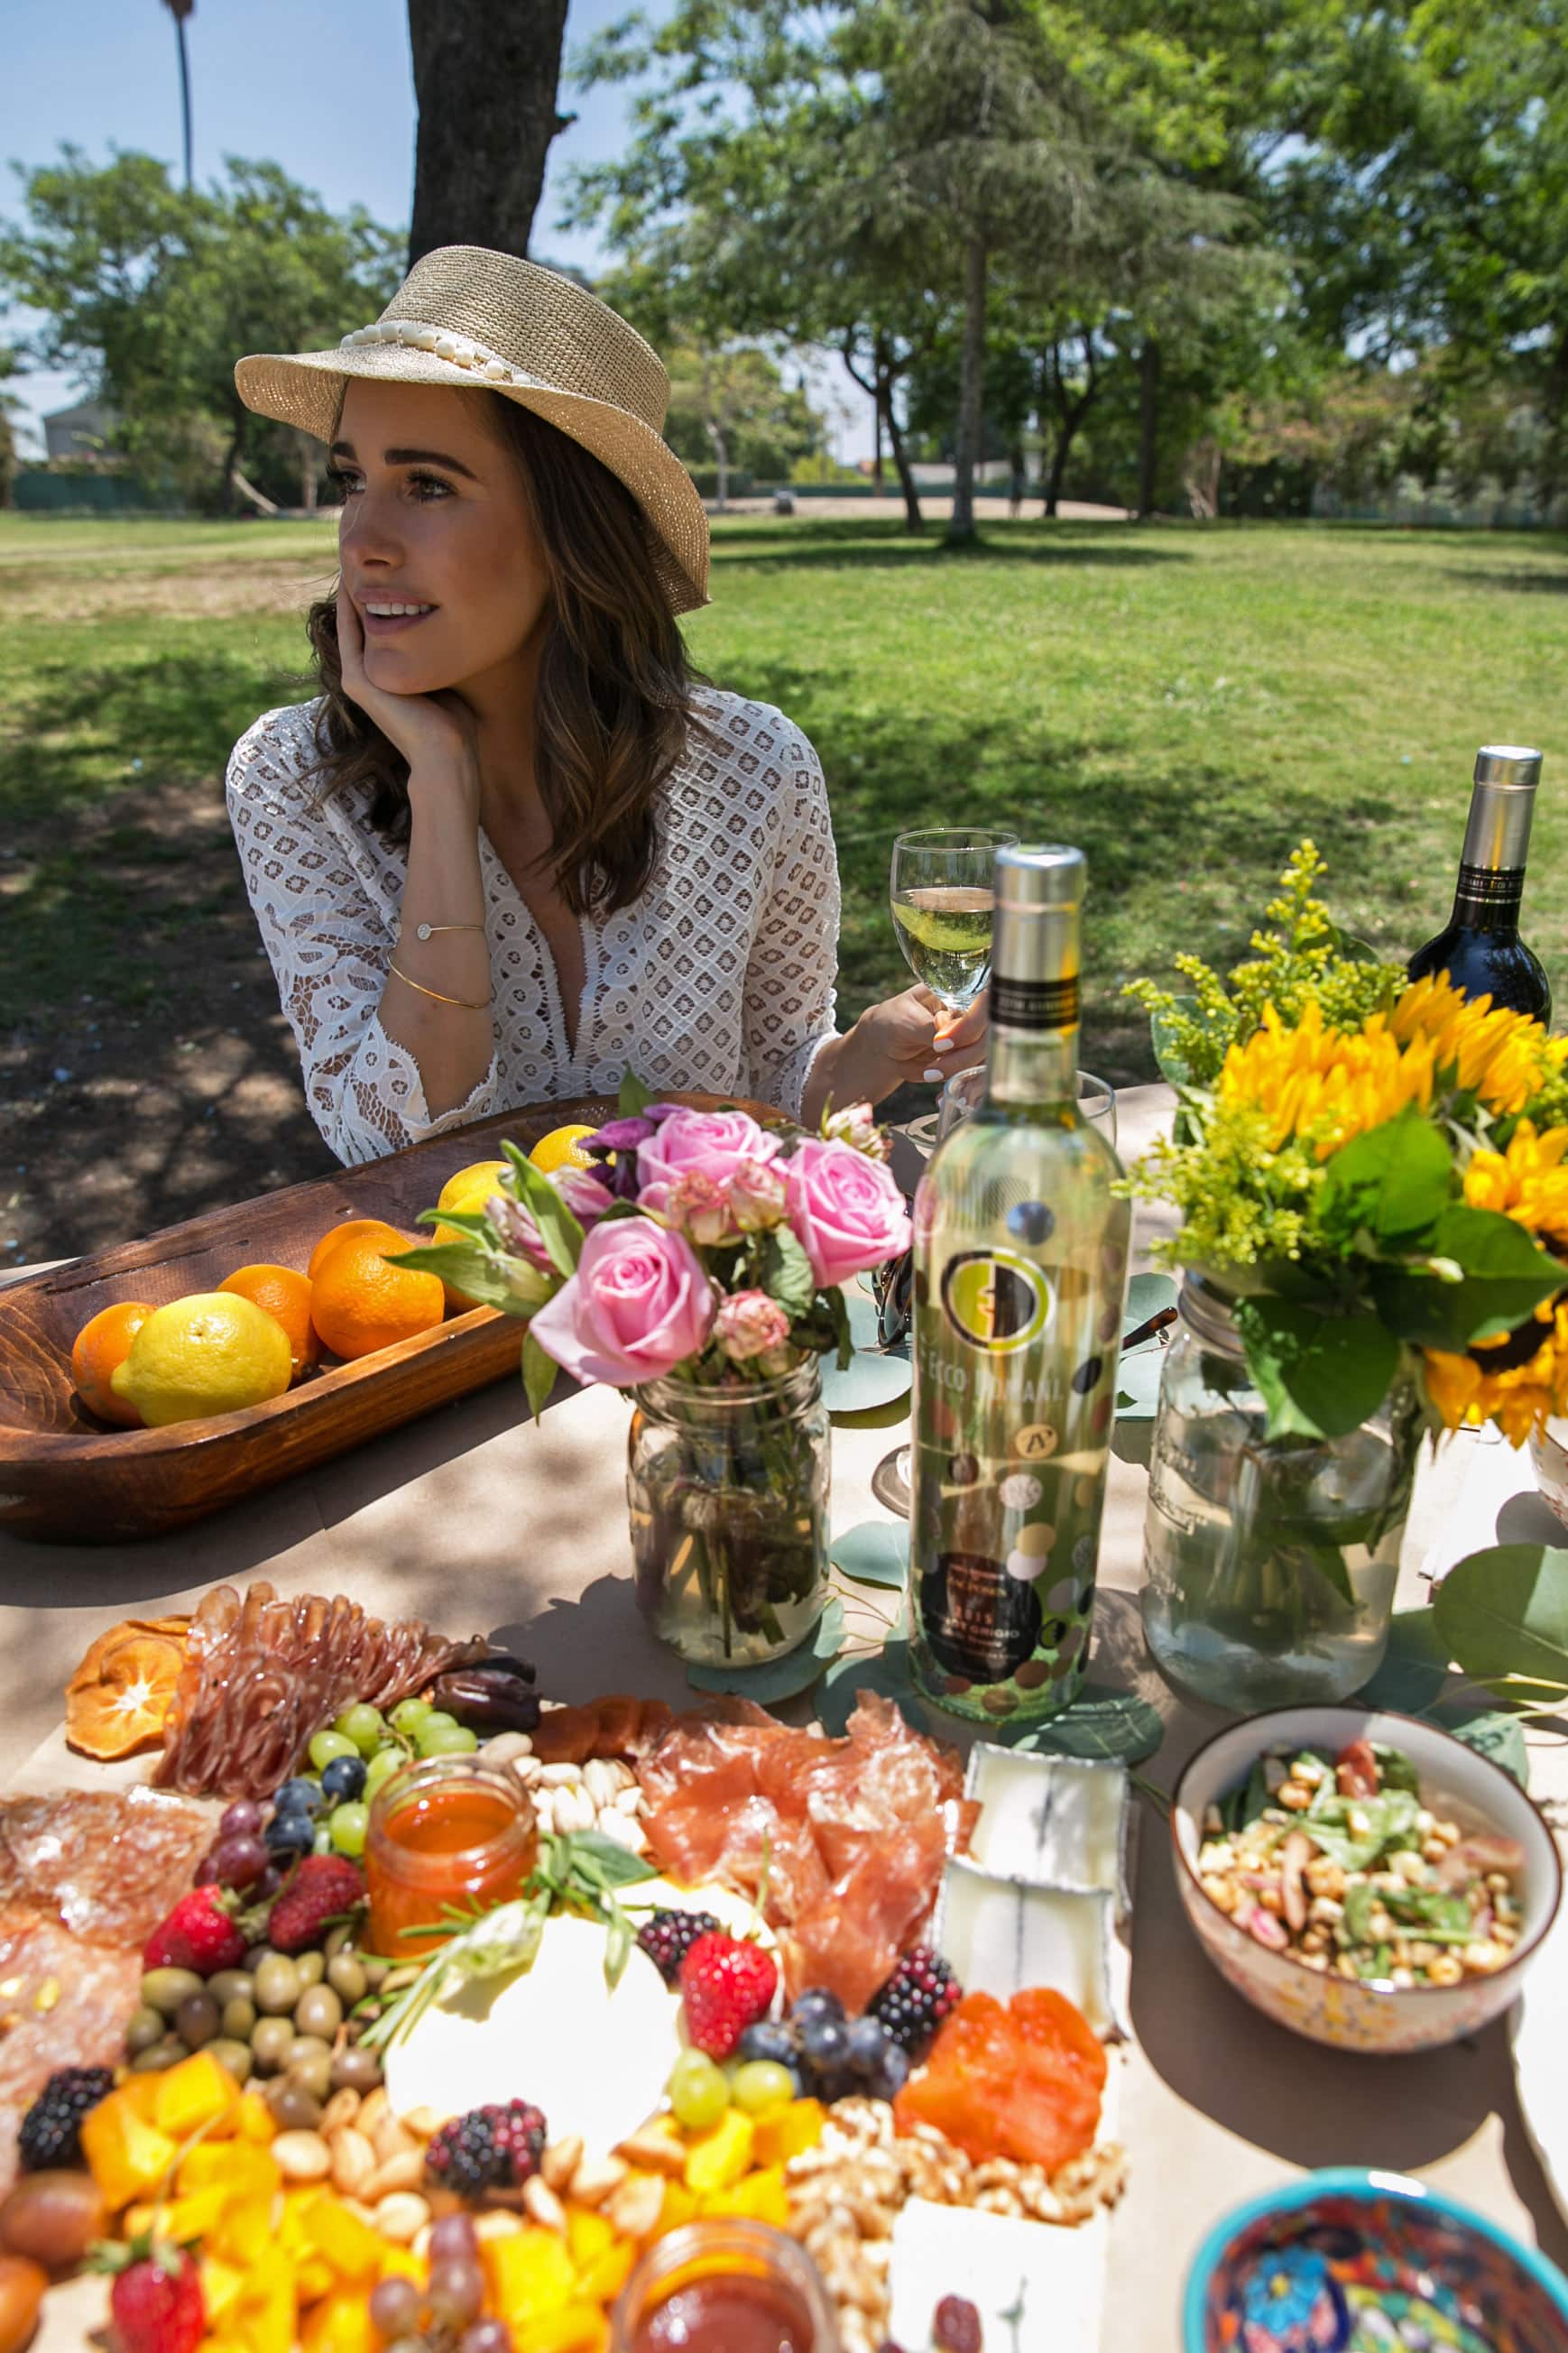 Louise Roe | Rustic Italian Inspired Summer Picnic | Summer Entertaining | Front Roe 3